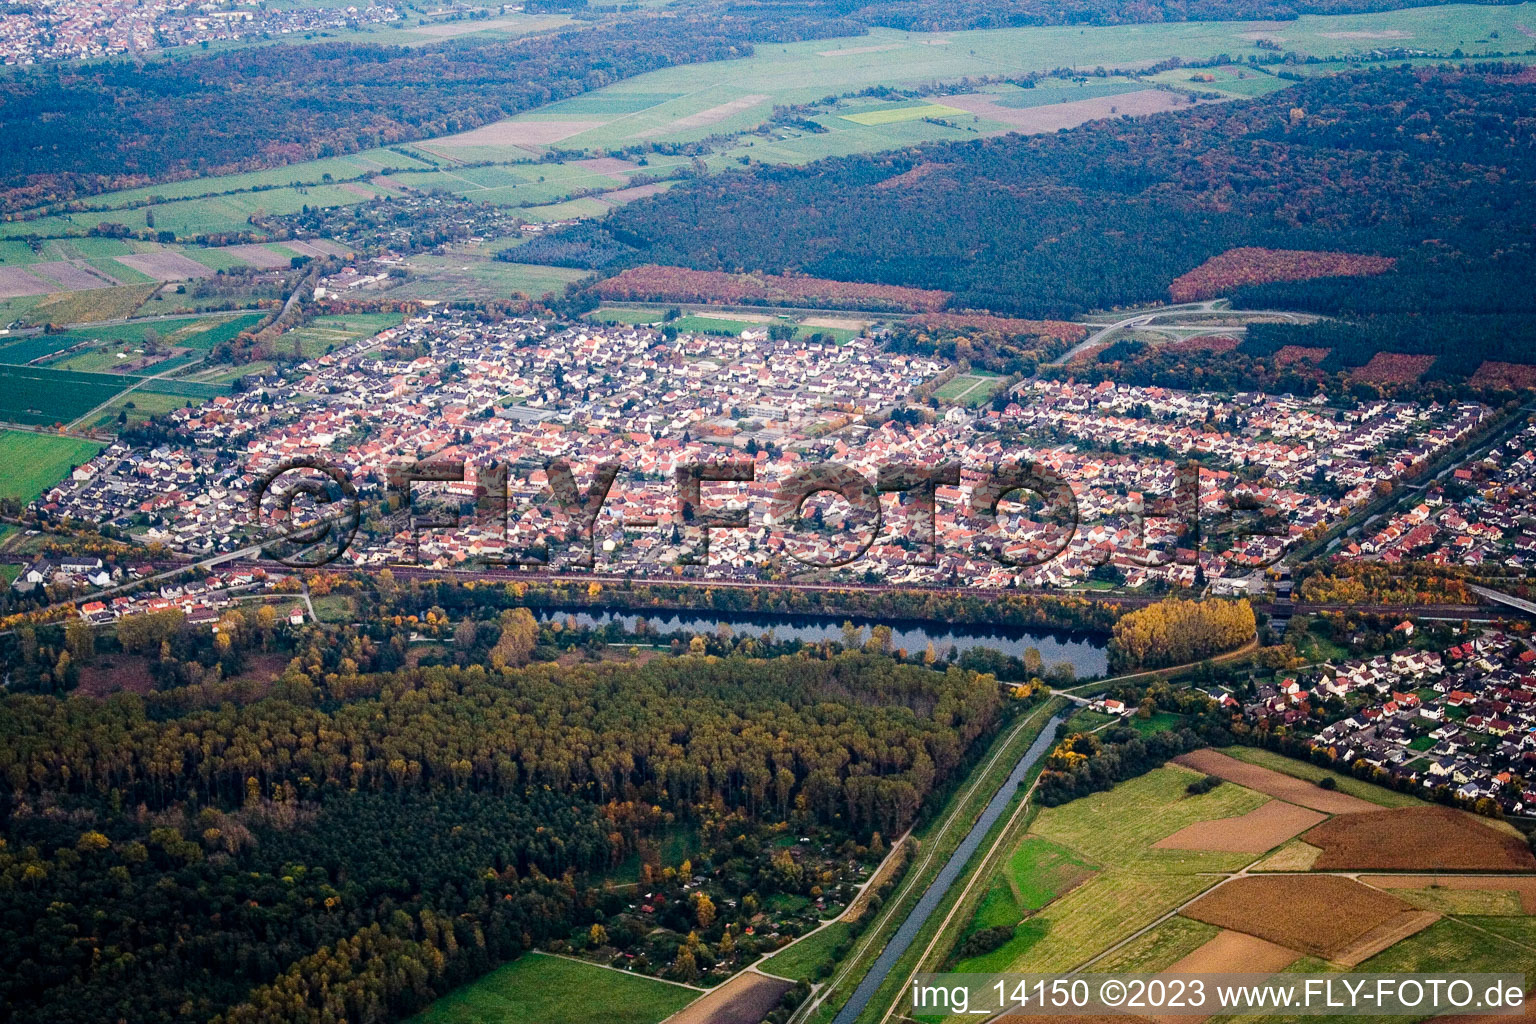 Drone recording of District Neudorf in Graben-Neudorf in the state Baden-Wuerttemberg, Germany